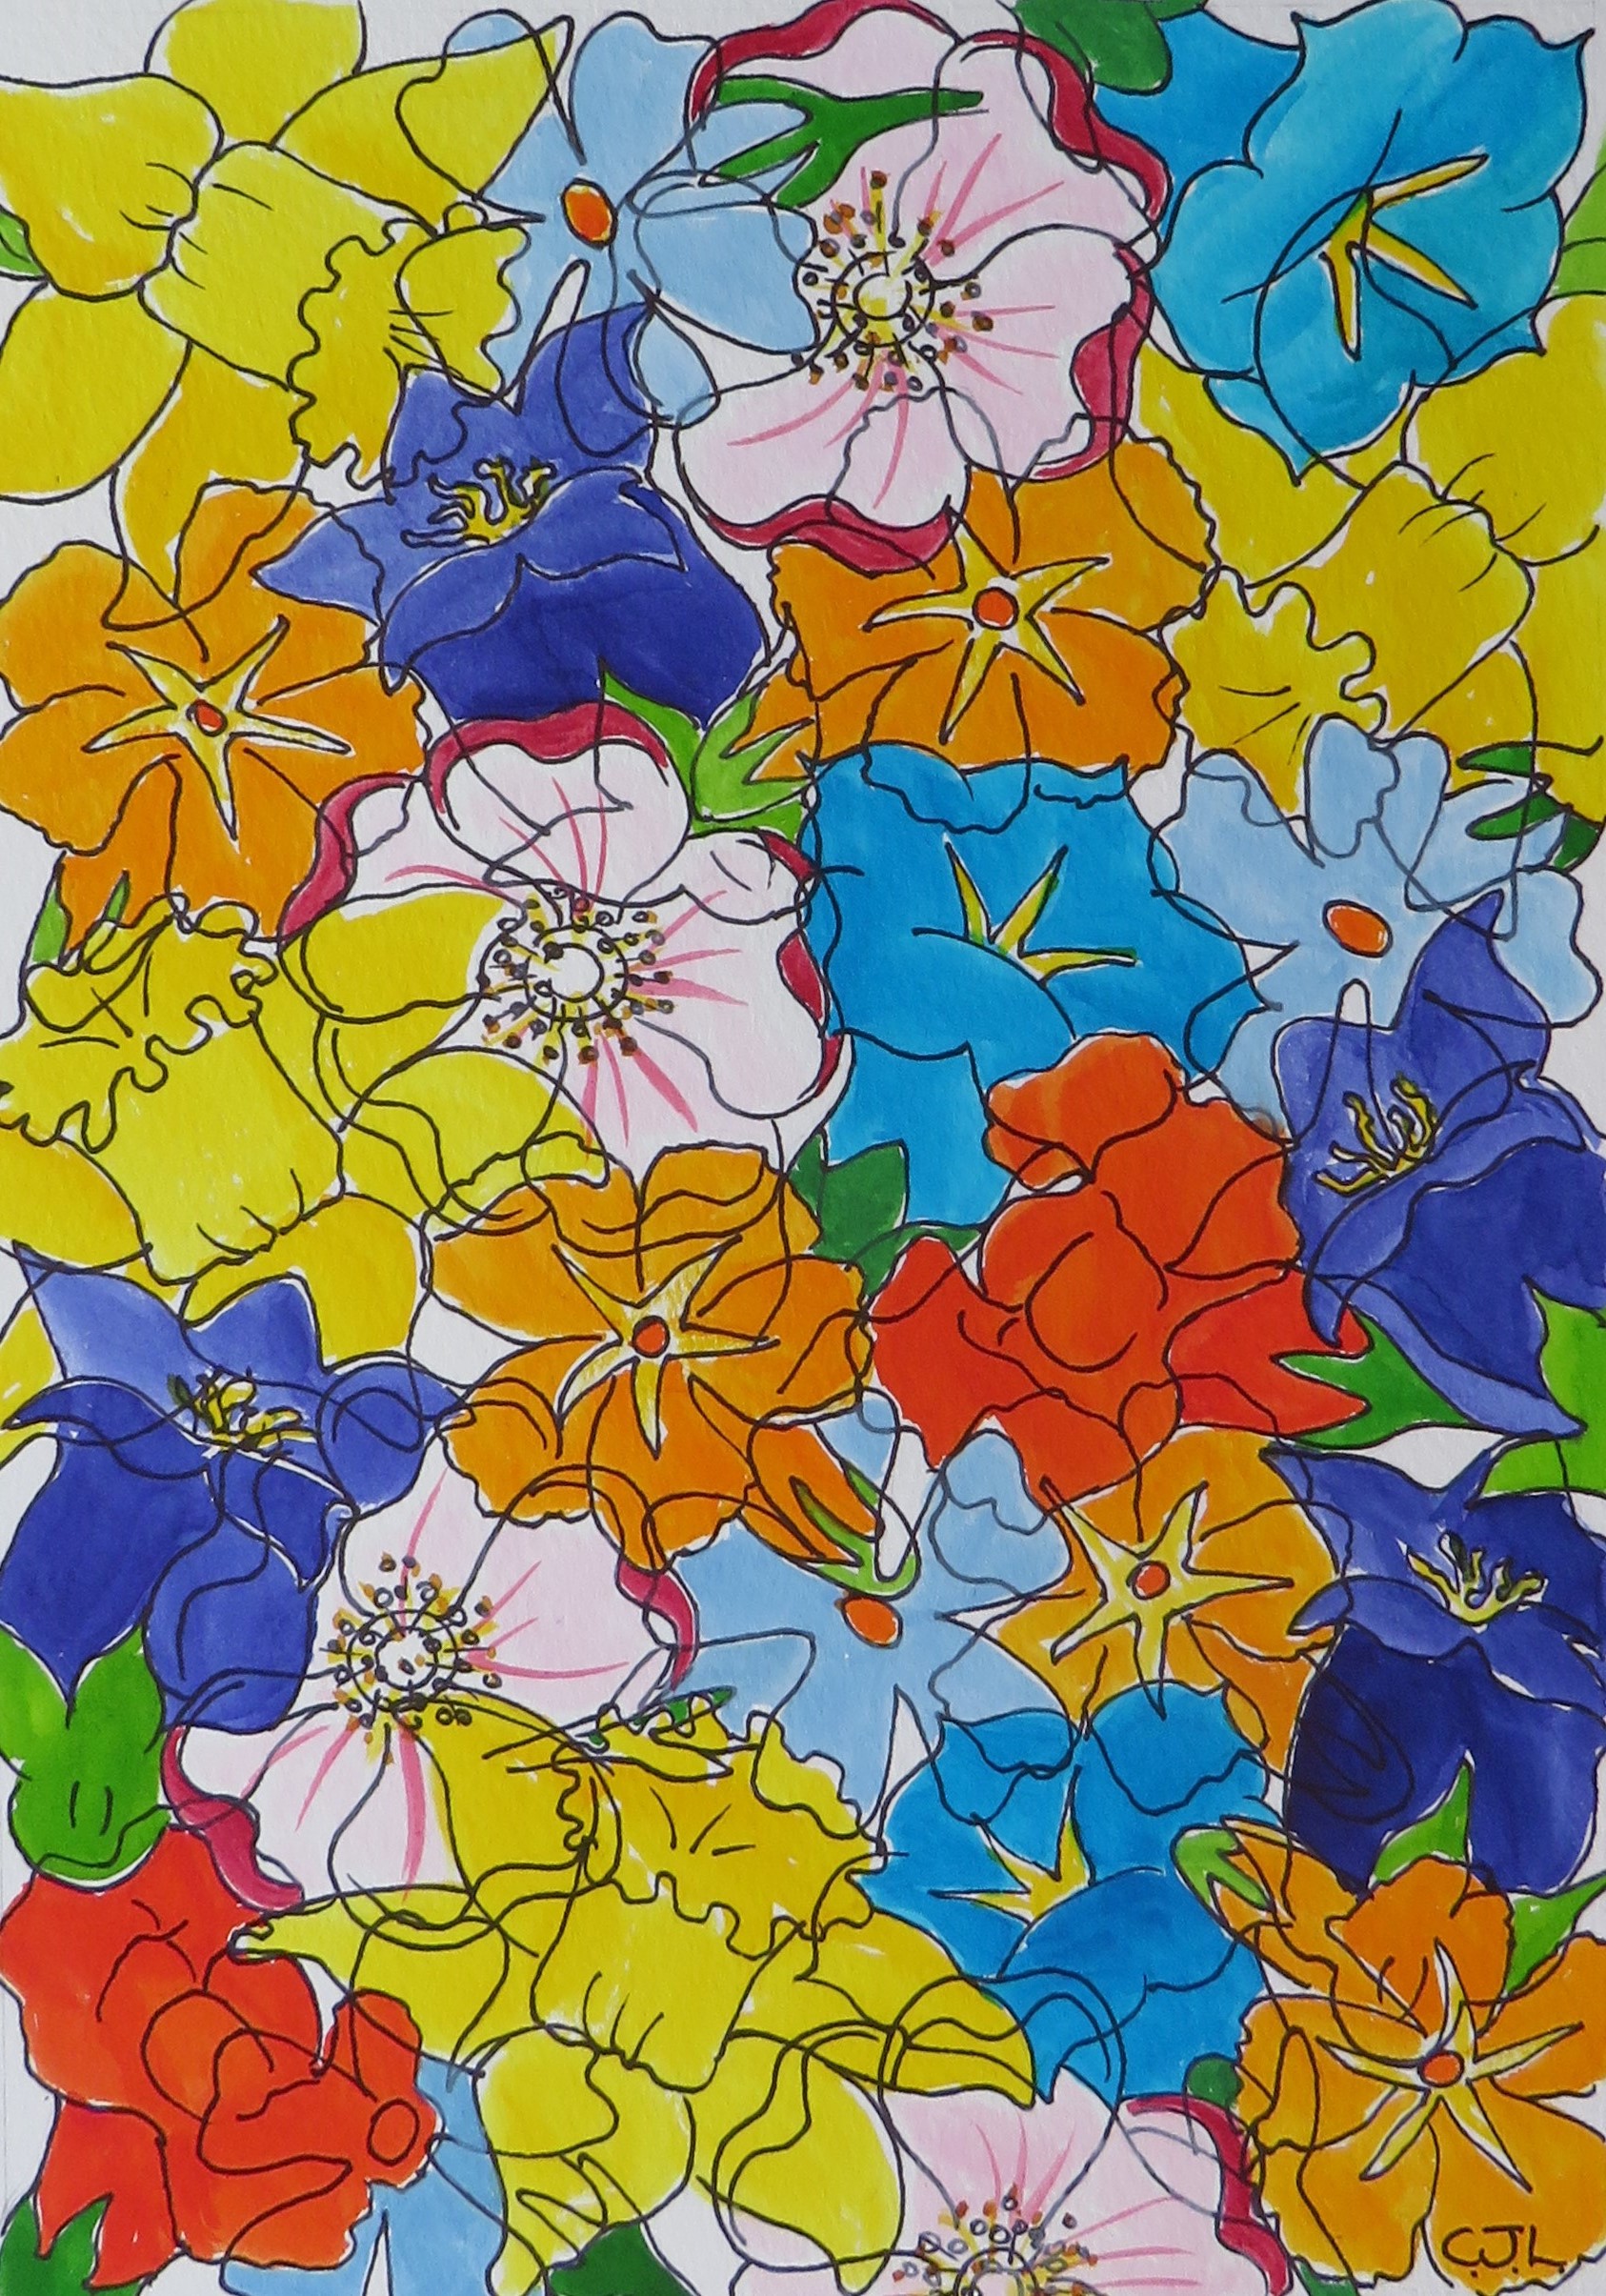 (10) Christine Lewis - The Shape of Flowers Image